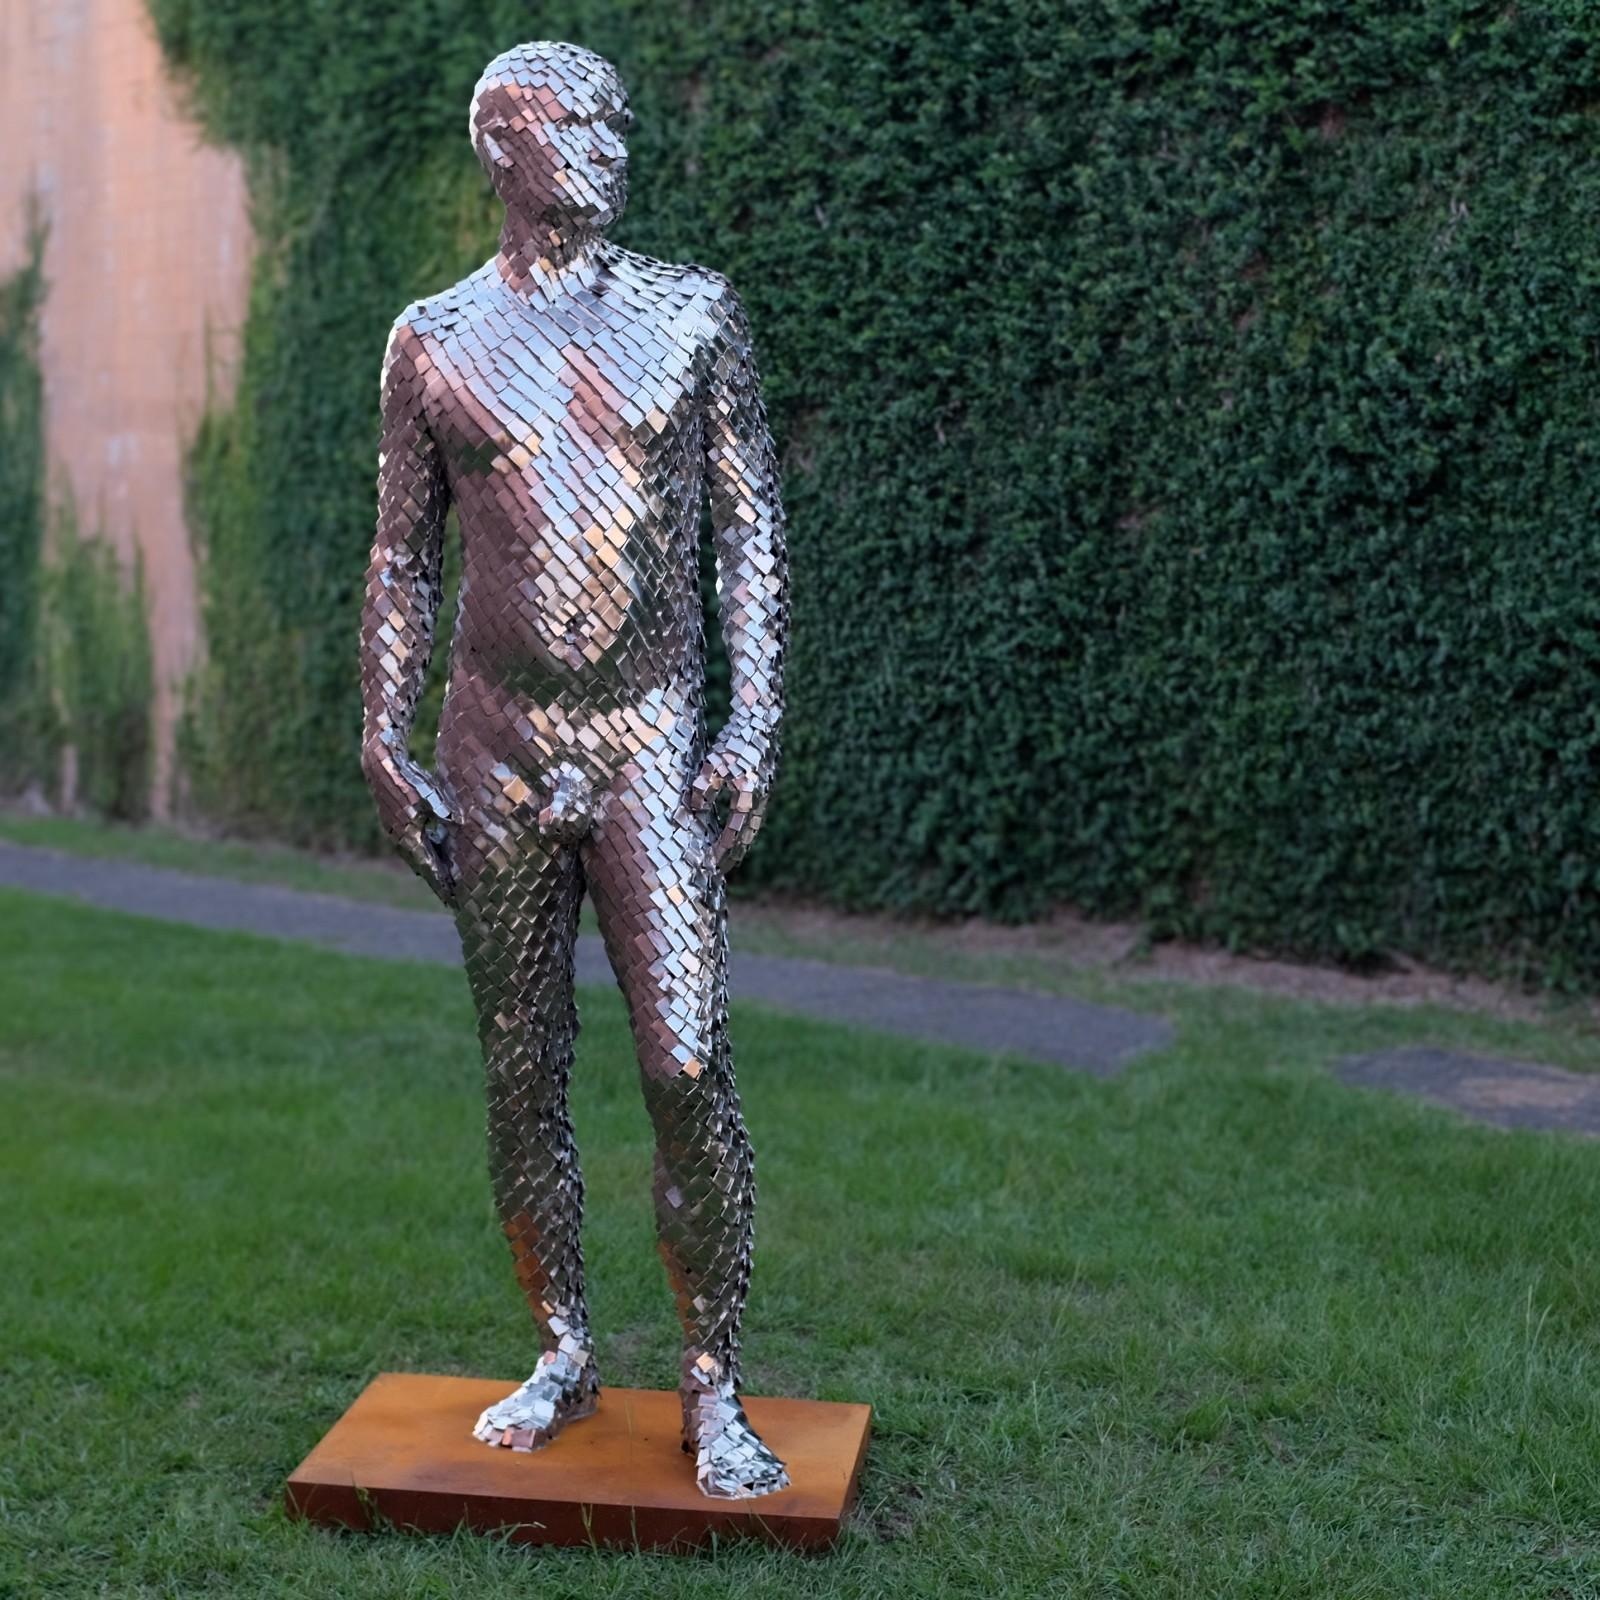 After Bathsheba - large, male nude figure, stainless steel outdoor sculpture - Sculpture by Jason Kimes